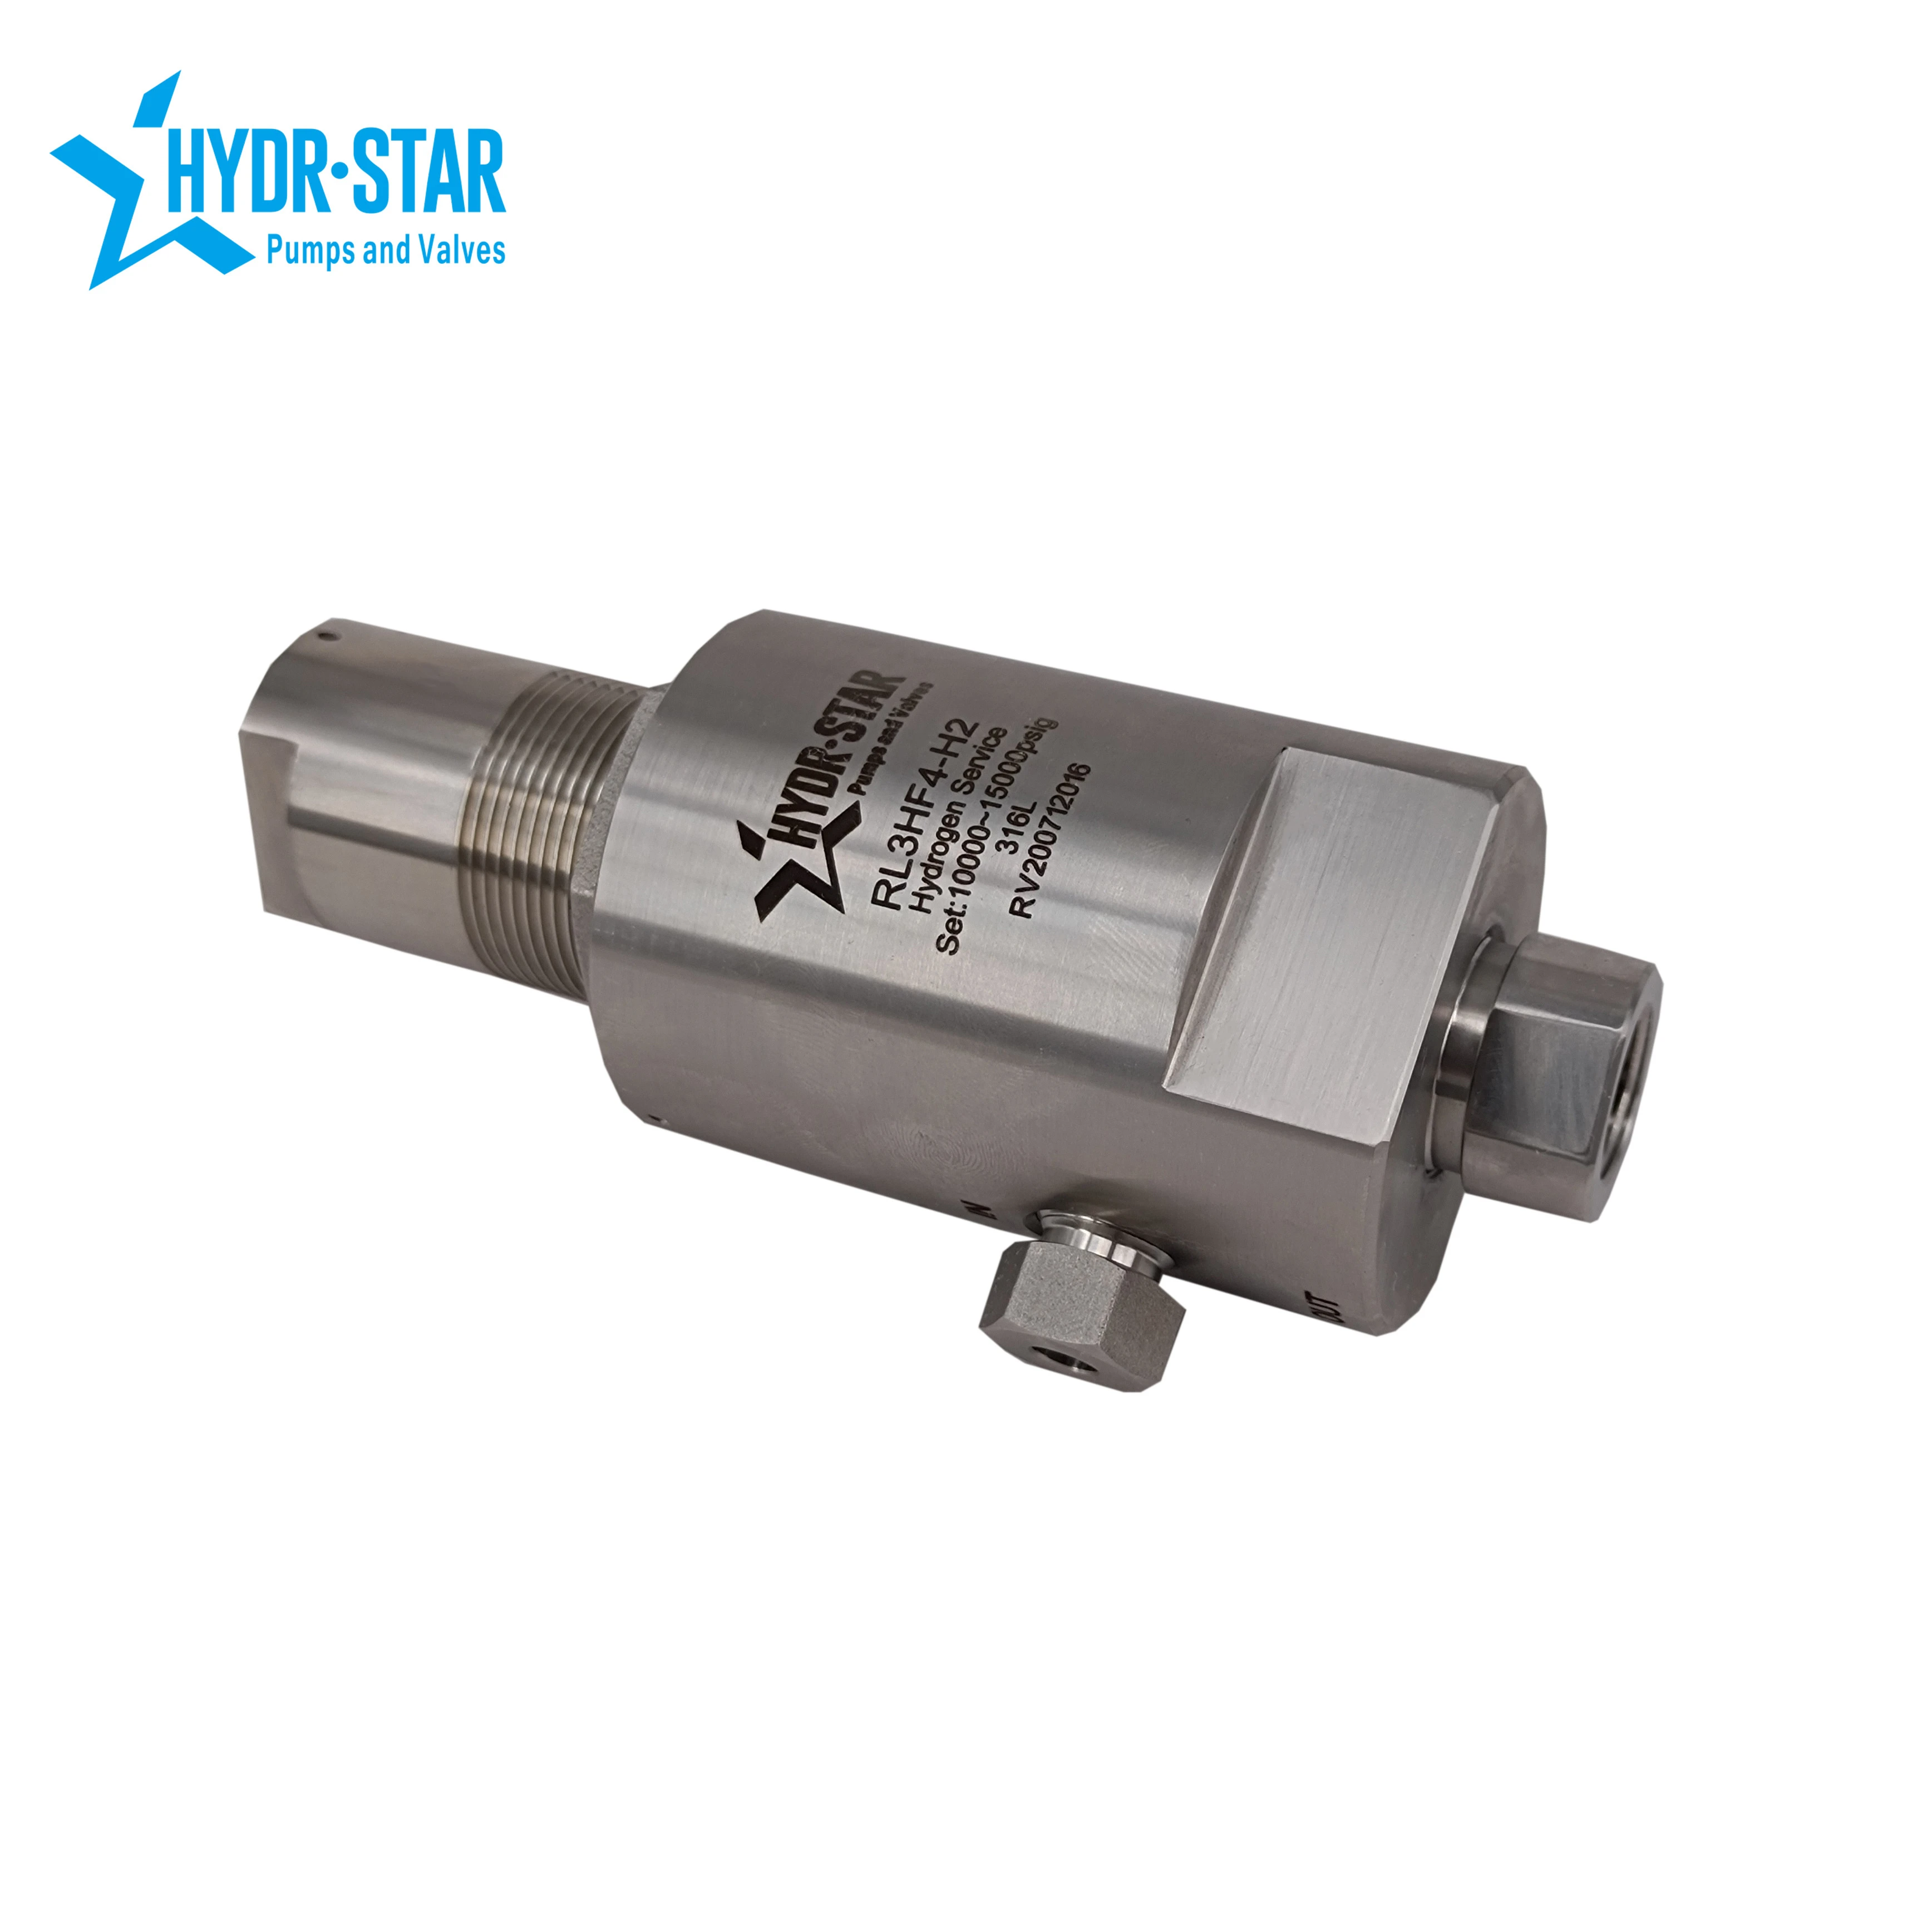 HYDR-STAR 316 Stainless Steel High Pressure Adjustable Safety Relief Valve Metal Seat Soft Seat Relief Valve